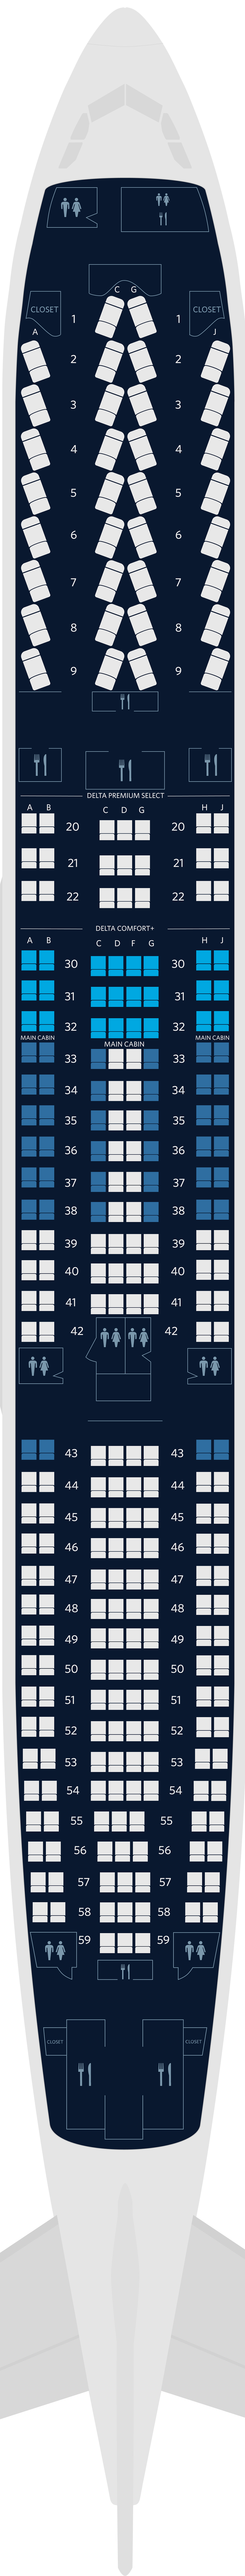 A330-300 seat map rendering